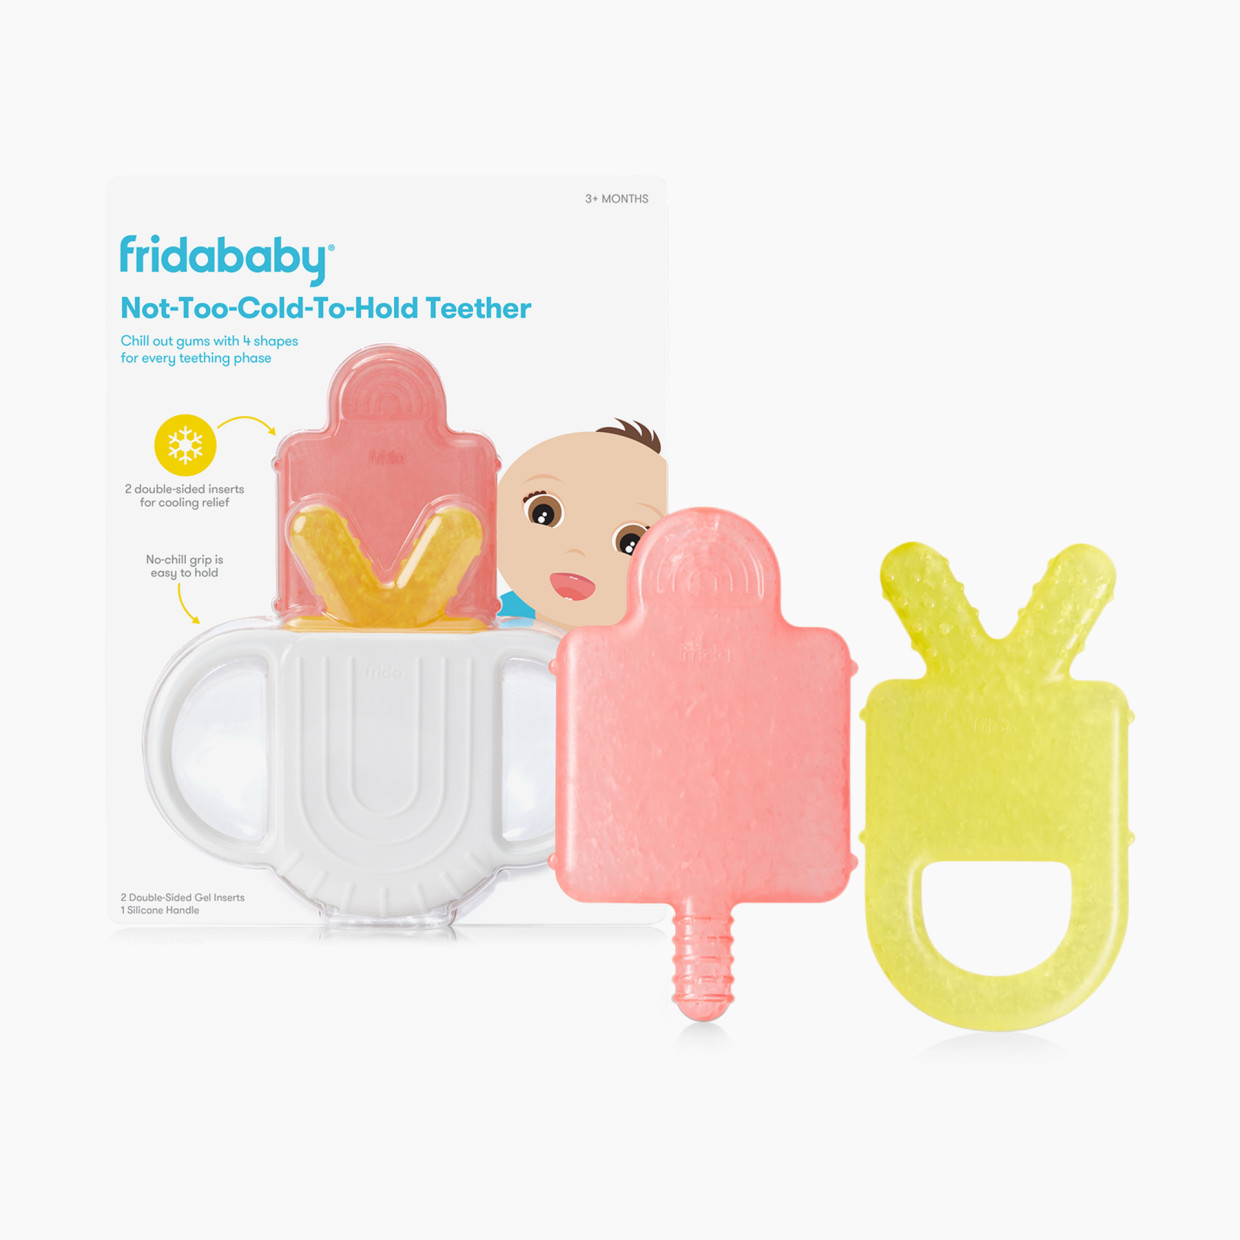 Double-sided Baby Pillow - BreathEasy